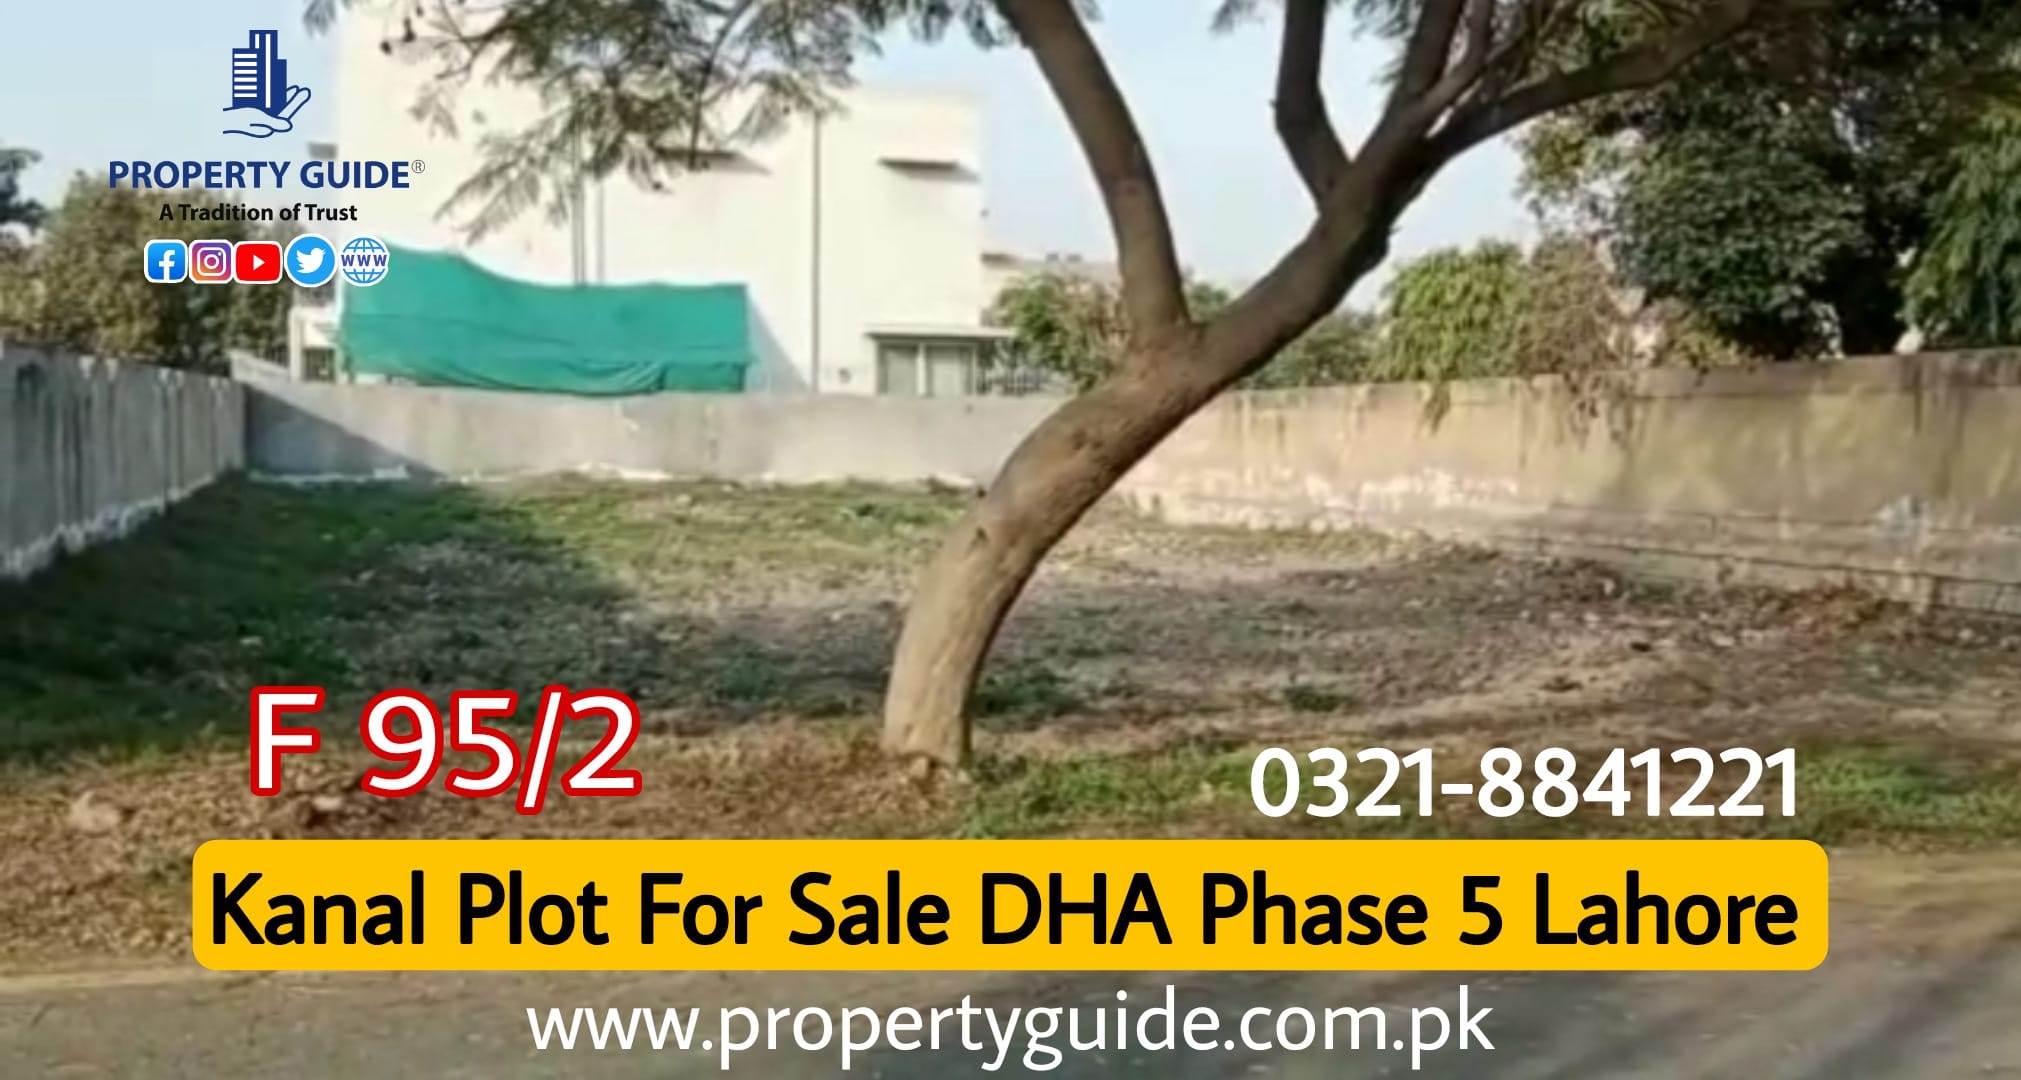 Kanal Plot For Sale In DHA Phase 5 Lahore F Block